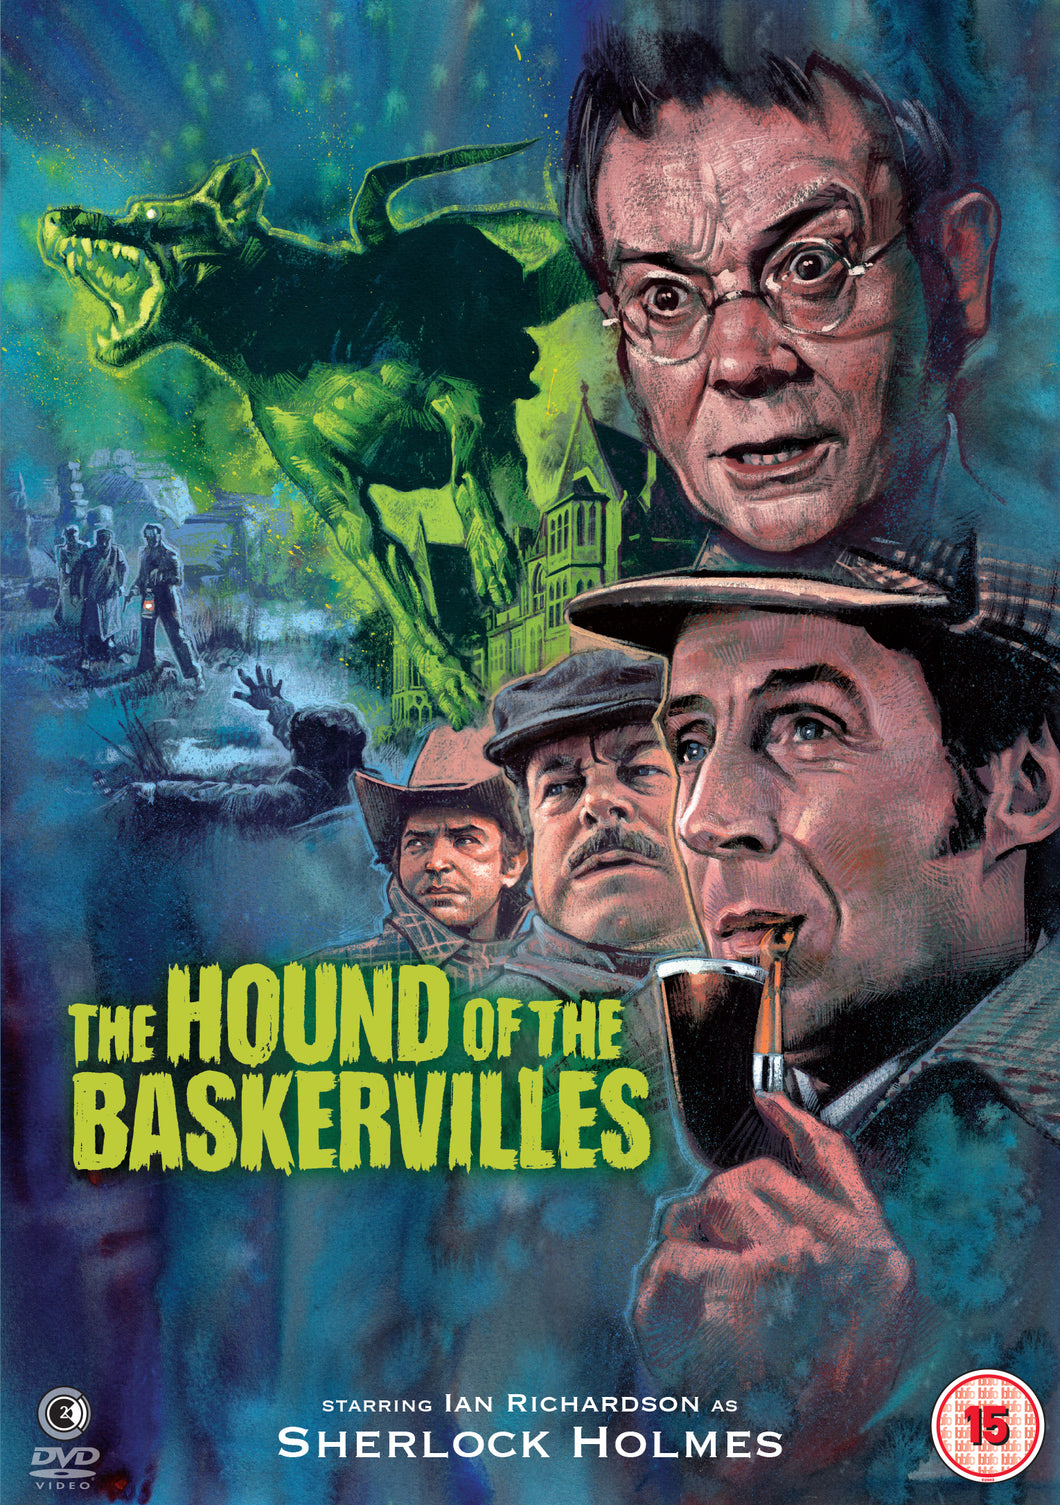 The Hound of the Baskervilles - Sherlock Holmes